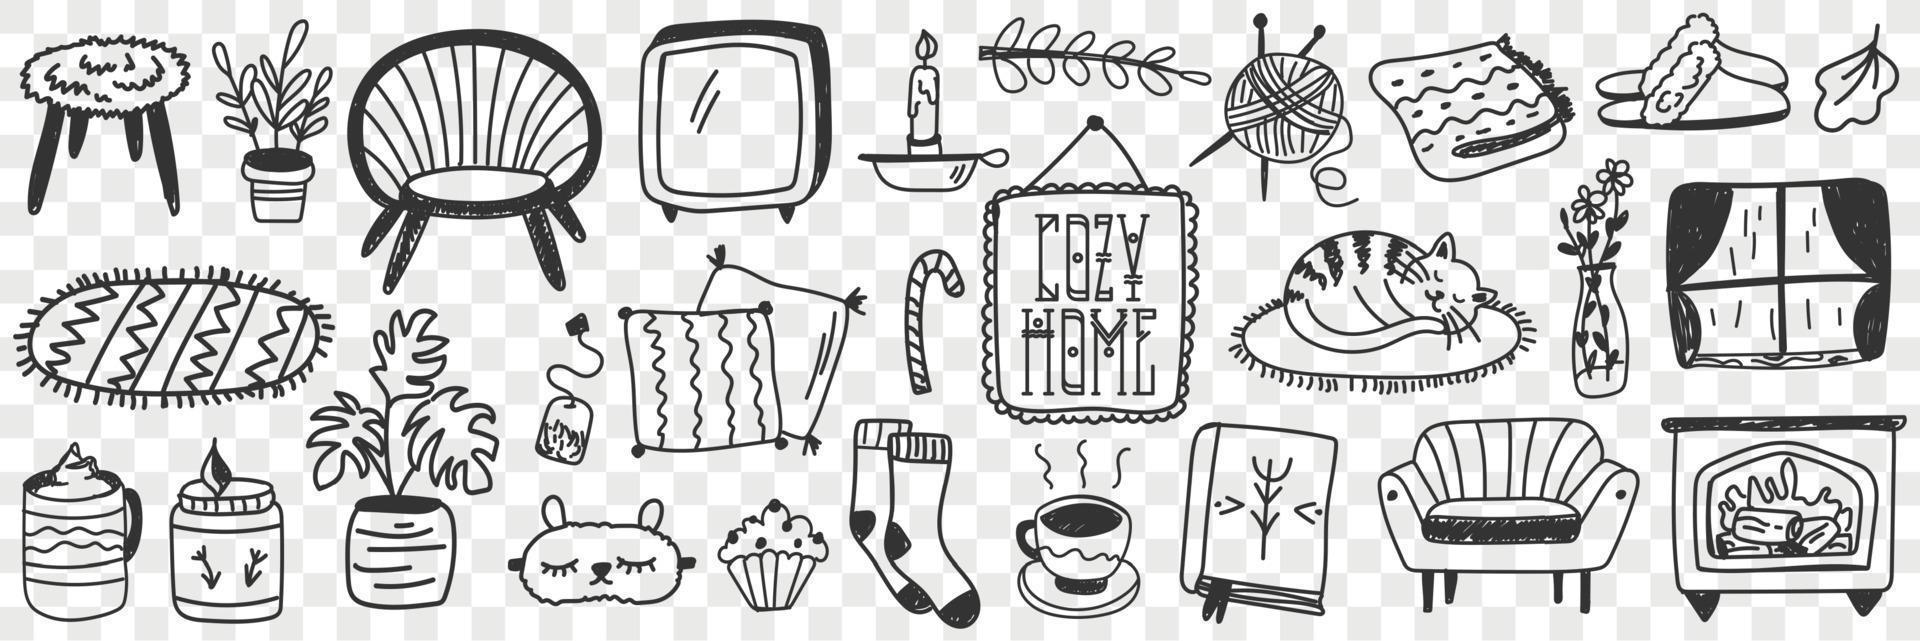 Cozy home accessories doodle set. Collection of hand drawn various furniture chairs candles picture socks knitting tea cat and plants isolated on transparent background vector